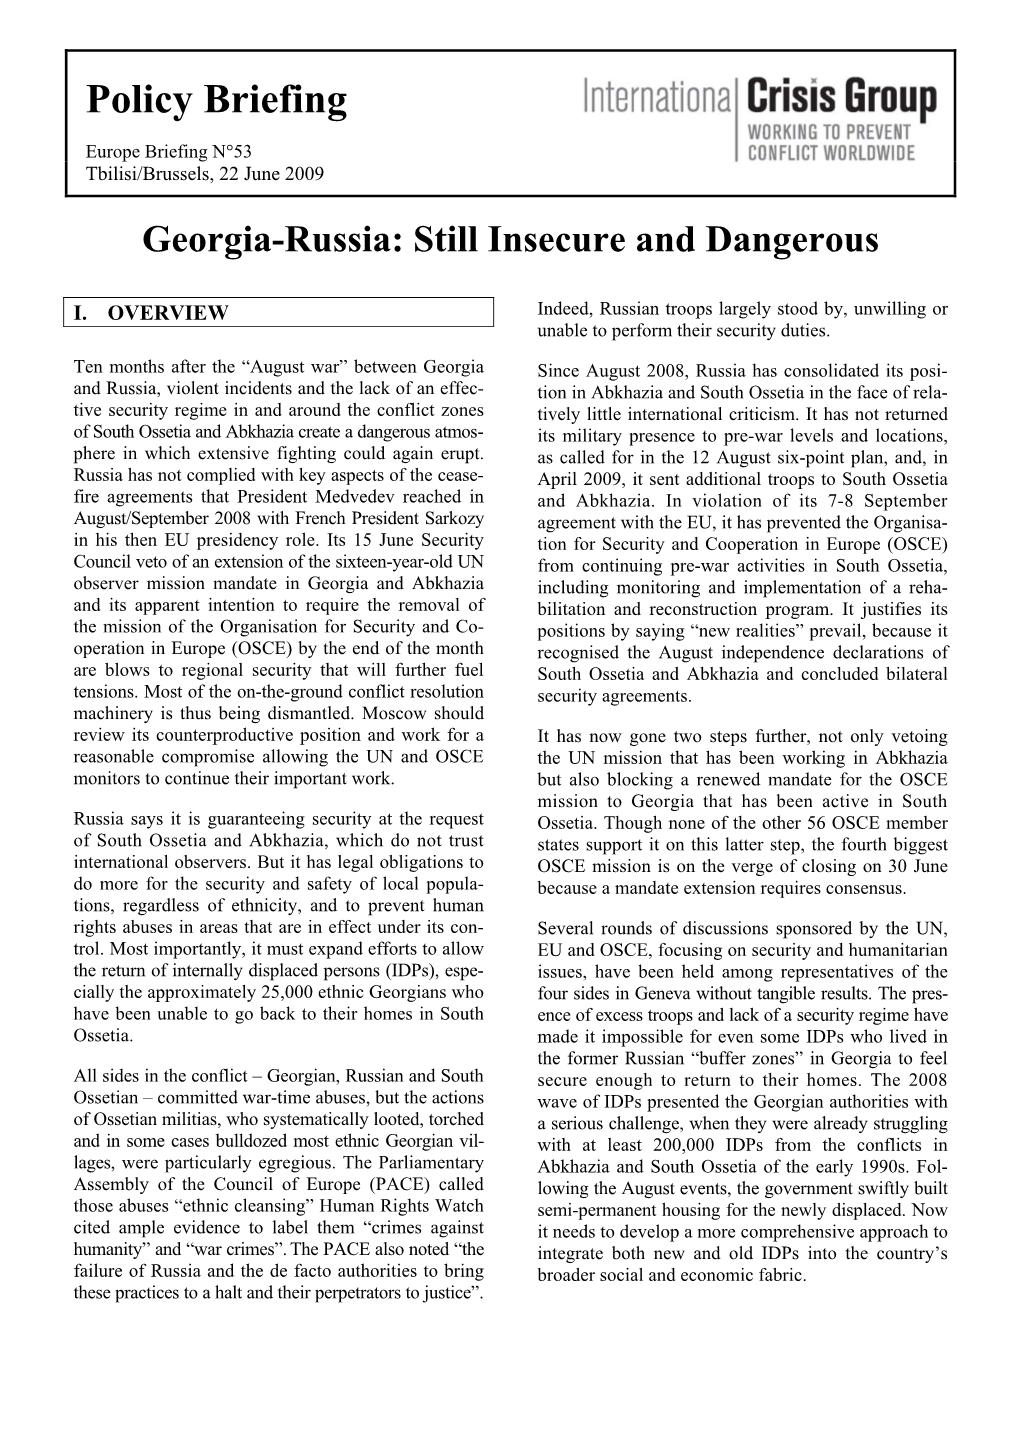 Georgia-Russia: Still Insecure and Dangerous